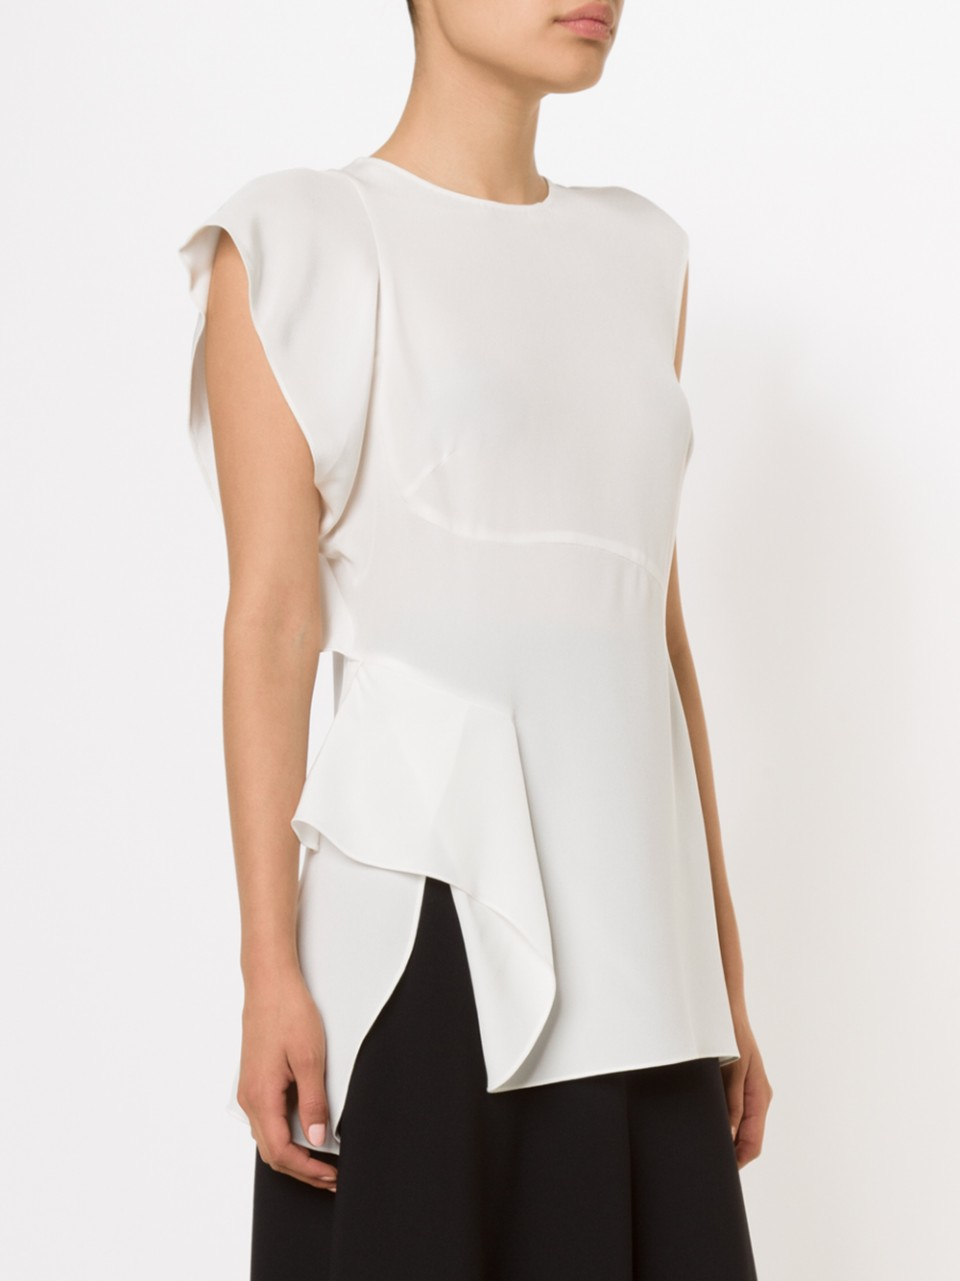 Lyst - 3.1 Phillip Lim Cascading Ruffle Top in White